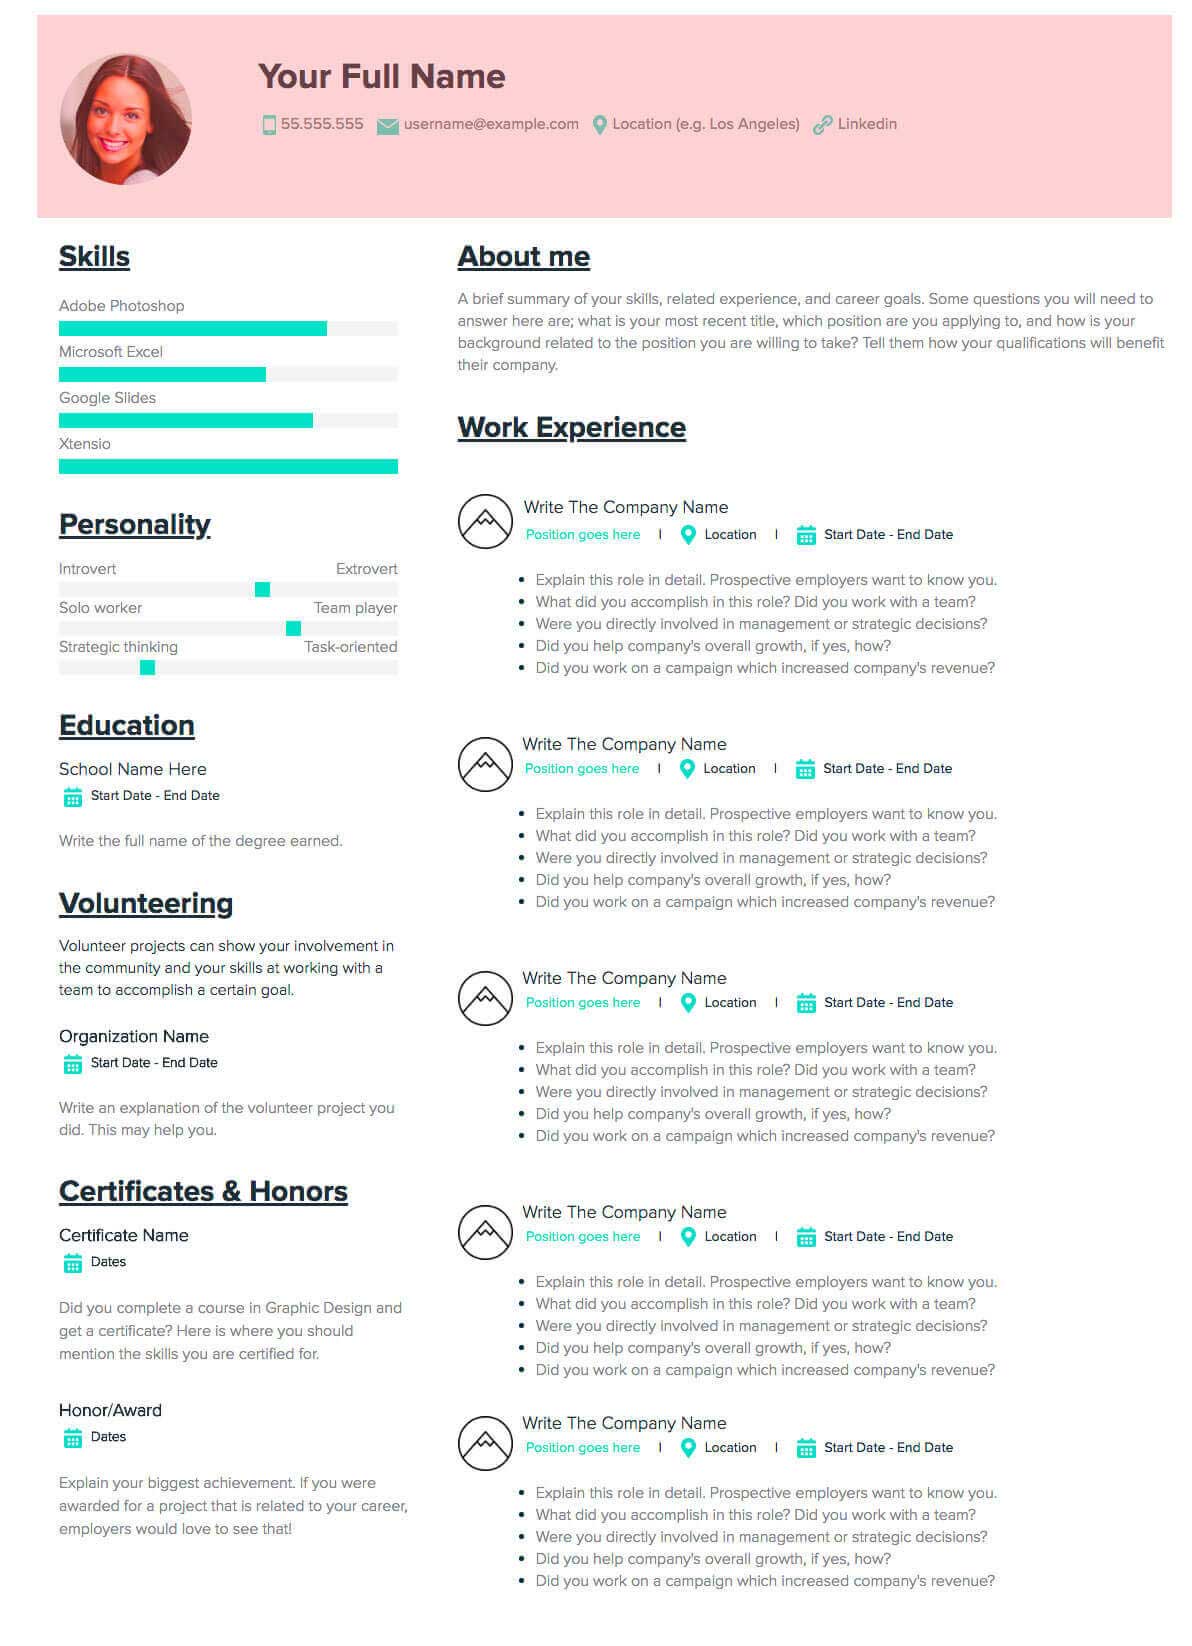 Resume Template, name and contact info